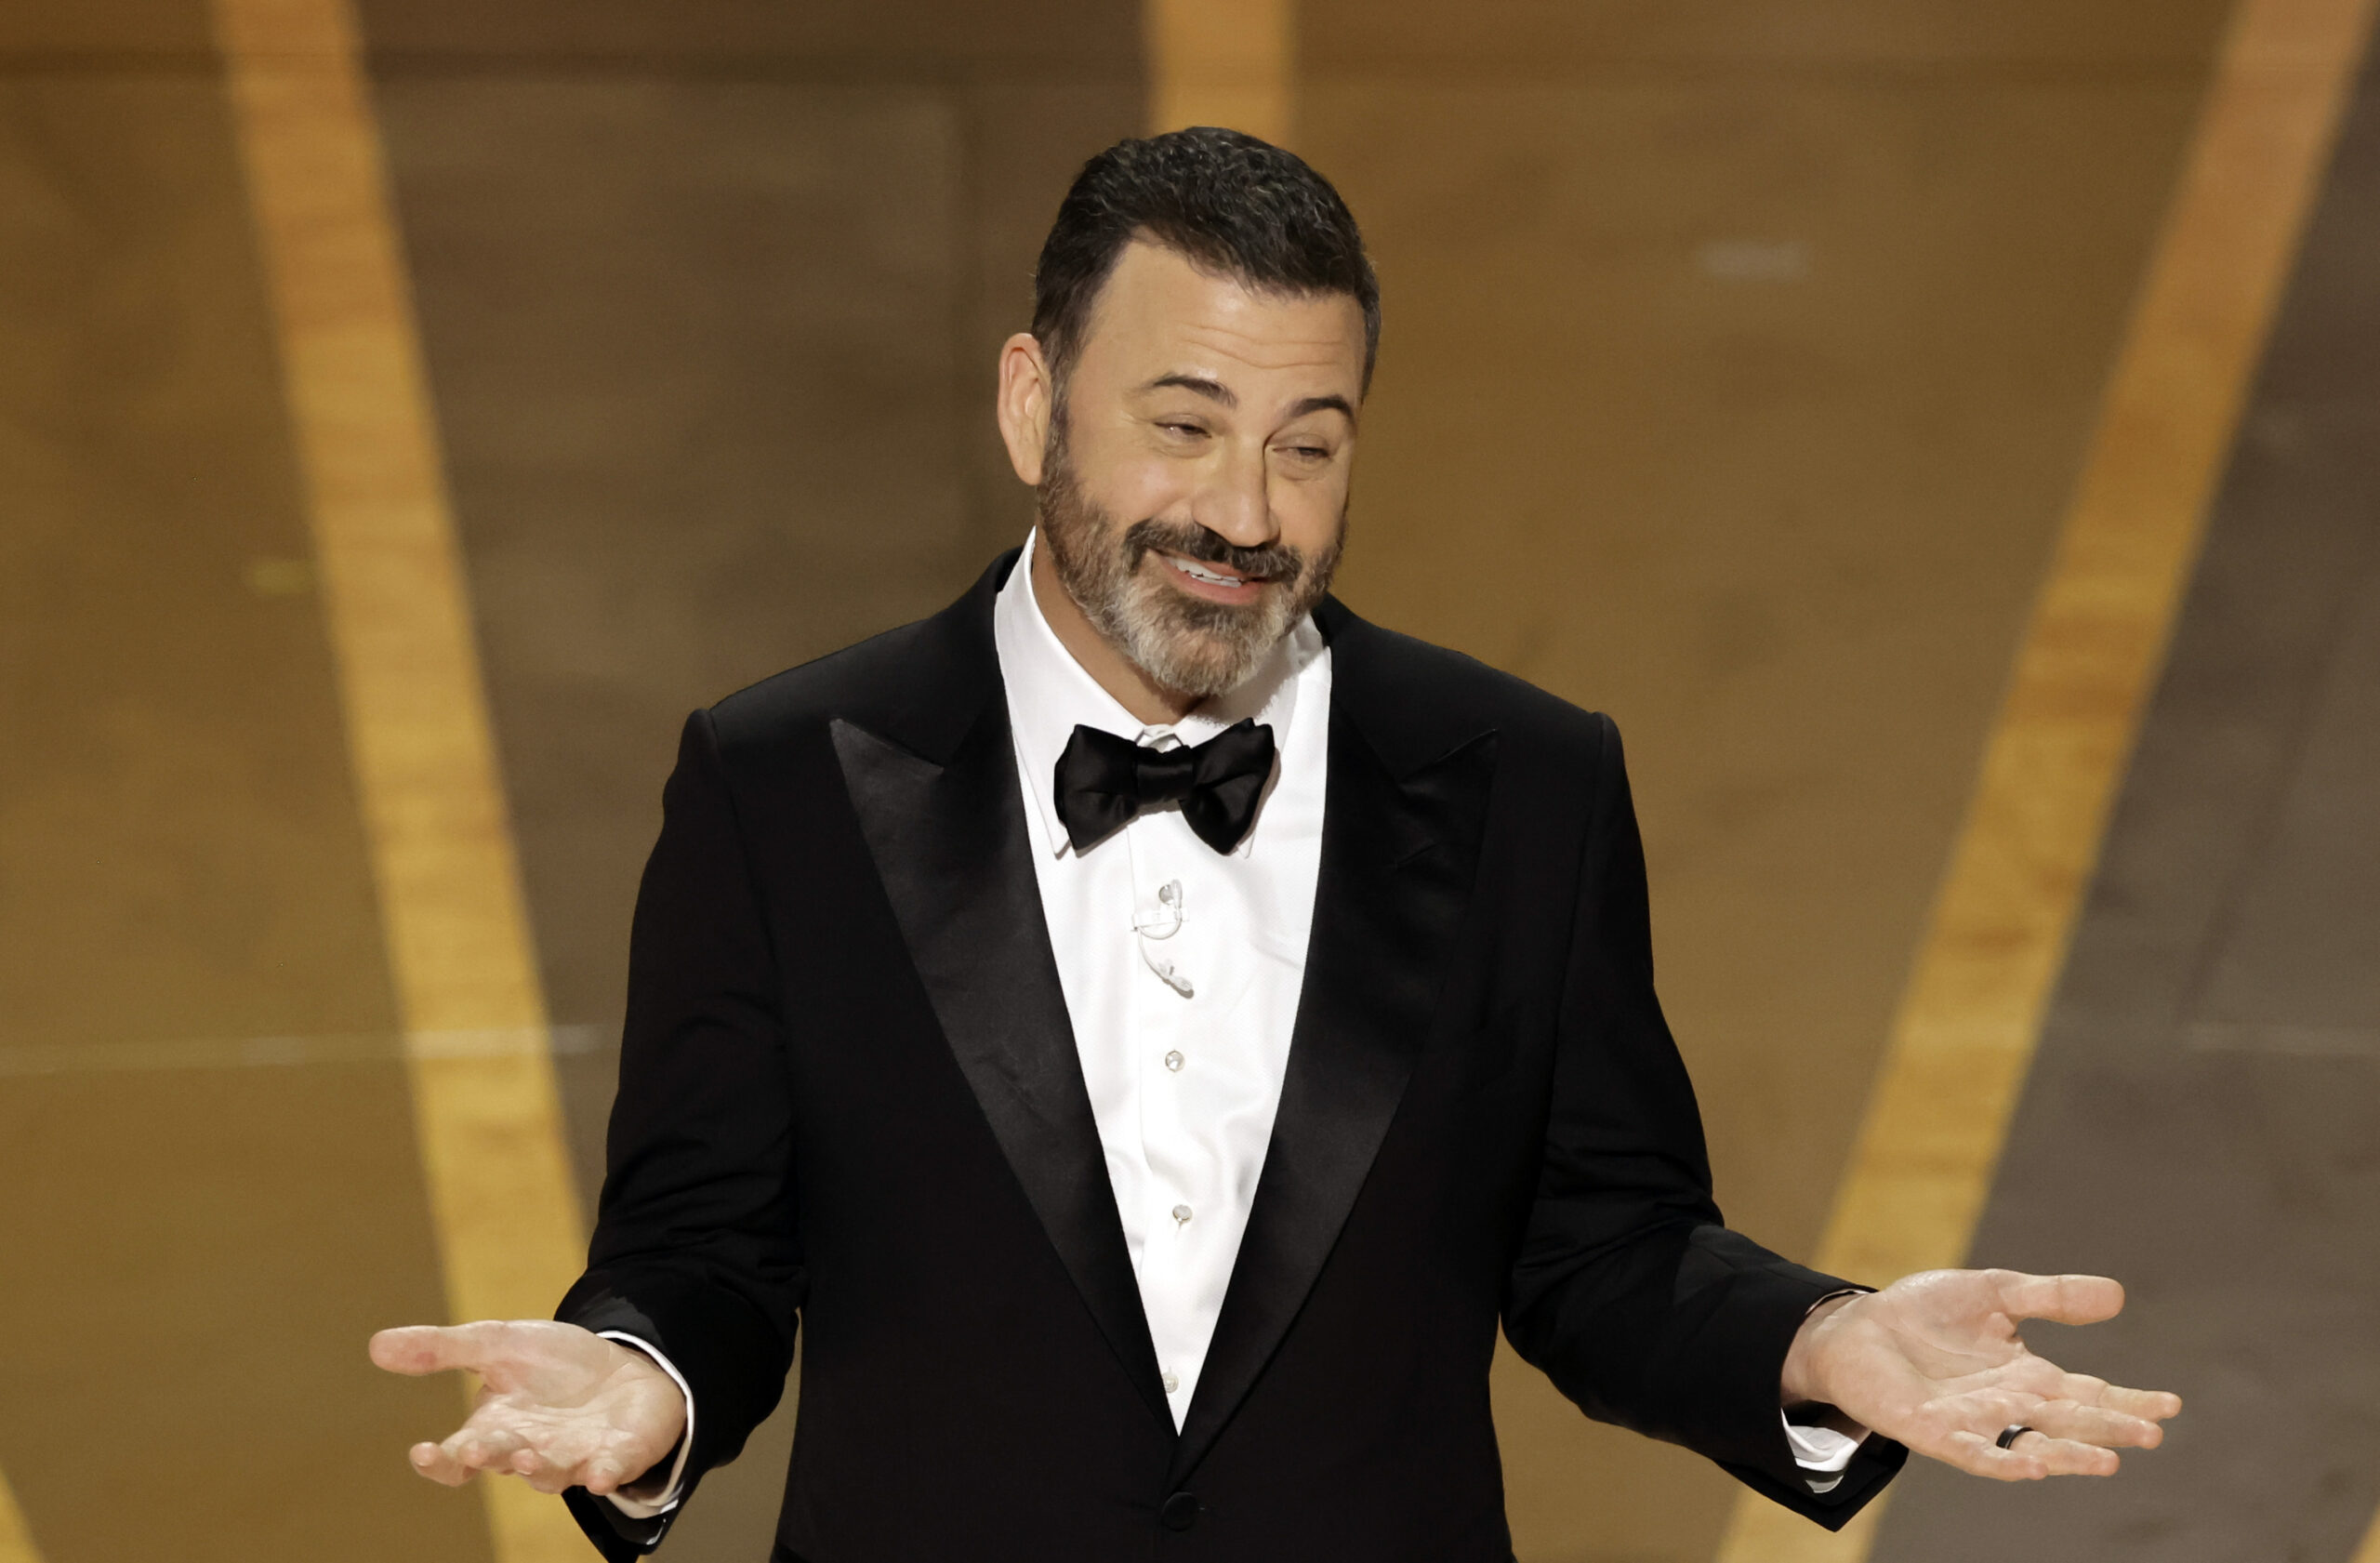 Jimmy Kimmel Suggests He’s Ready To Leave Late Night TV Show